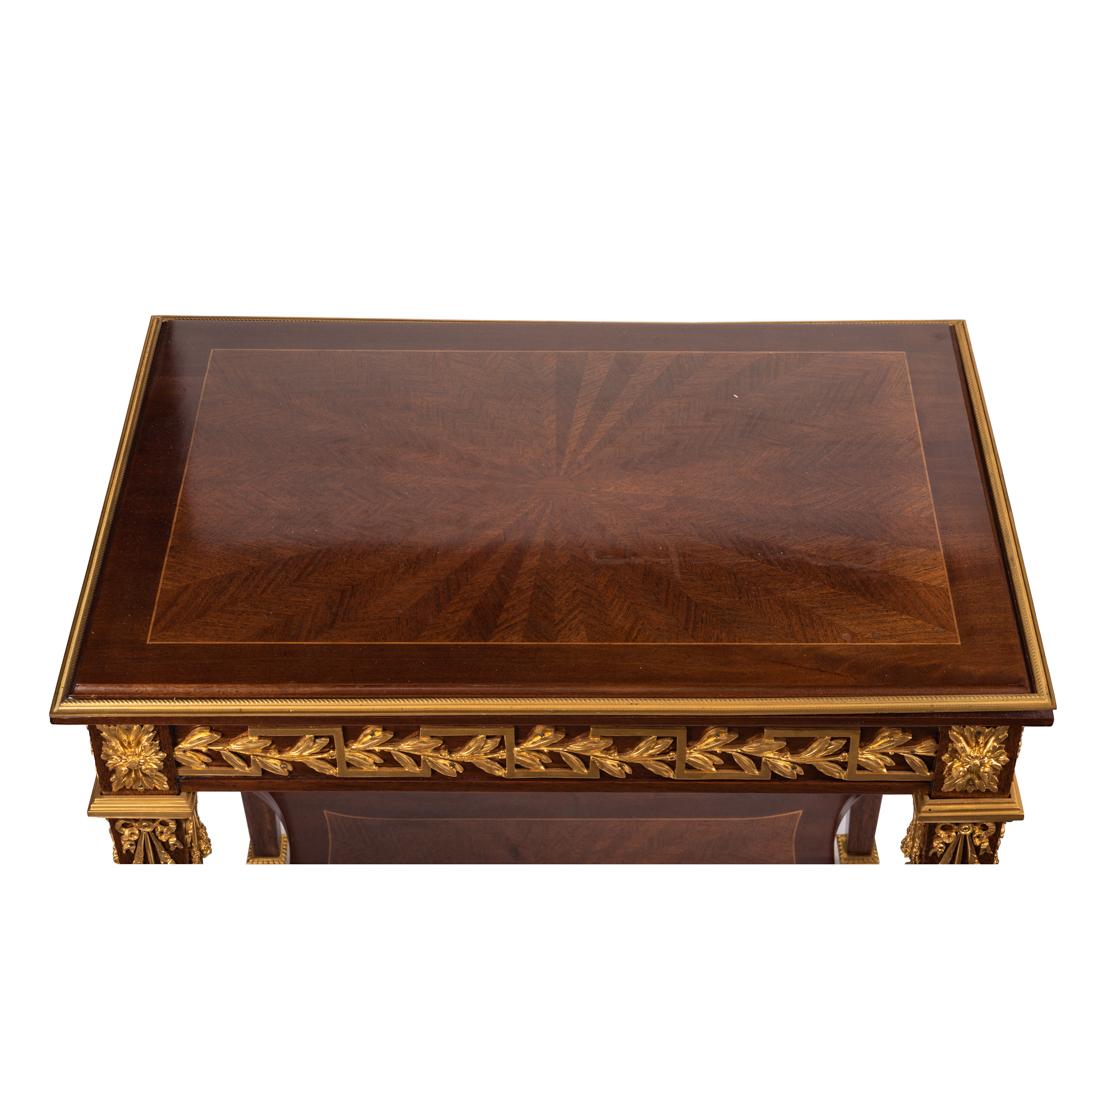 A Louis XVI style table in solid amaranth with gilt bronze mounts, containing a frieze drawer,
Measures: Height 19.5 in. (49.53 cm.)
Width 24 in. (60.96 cm.)
Depth 16 in. (40.64 cm.)